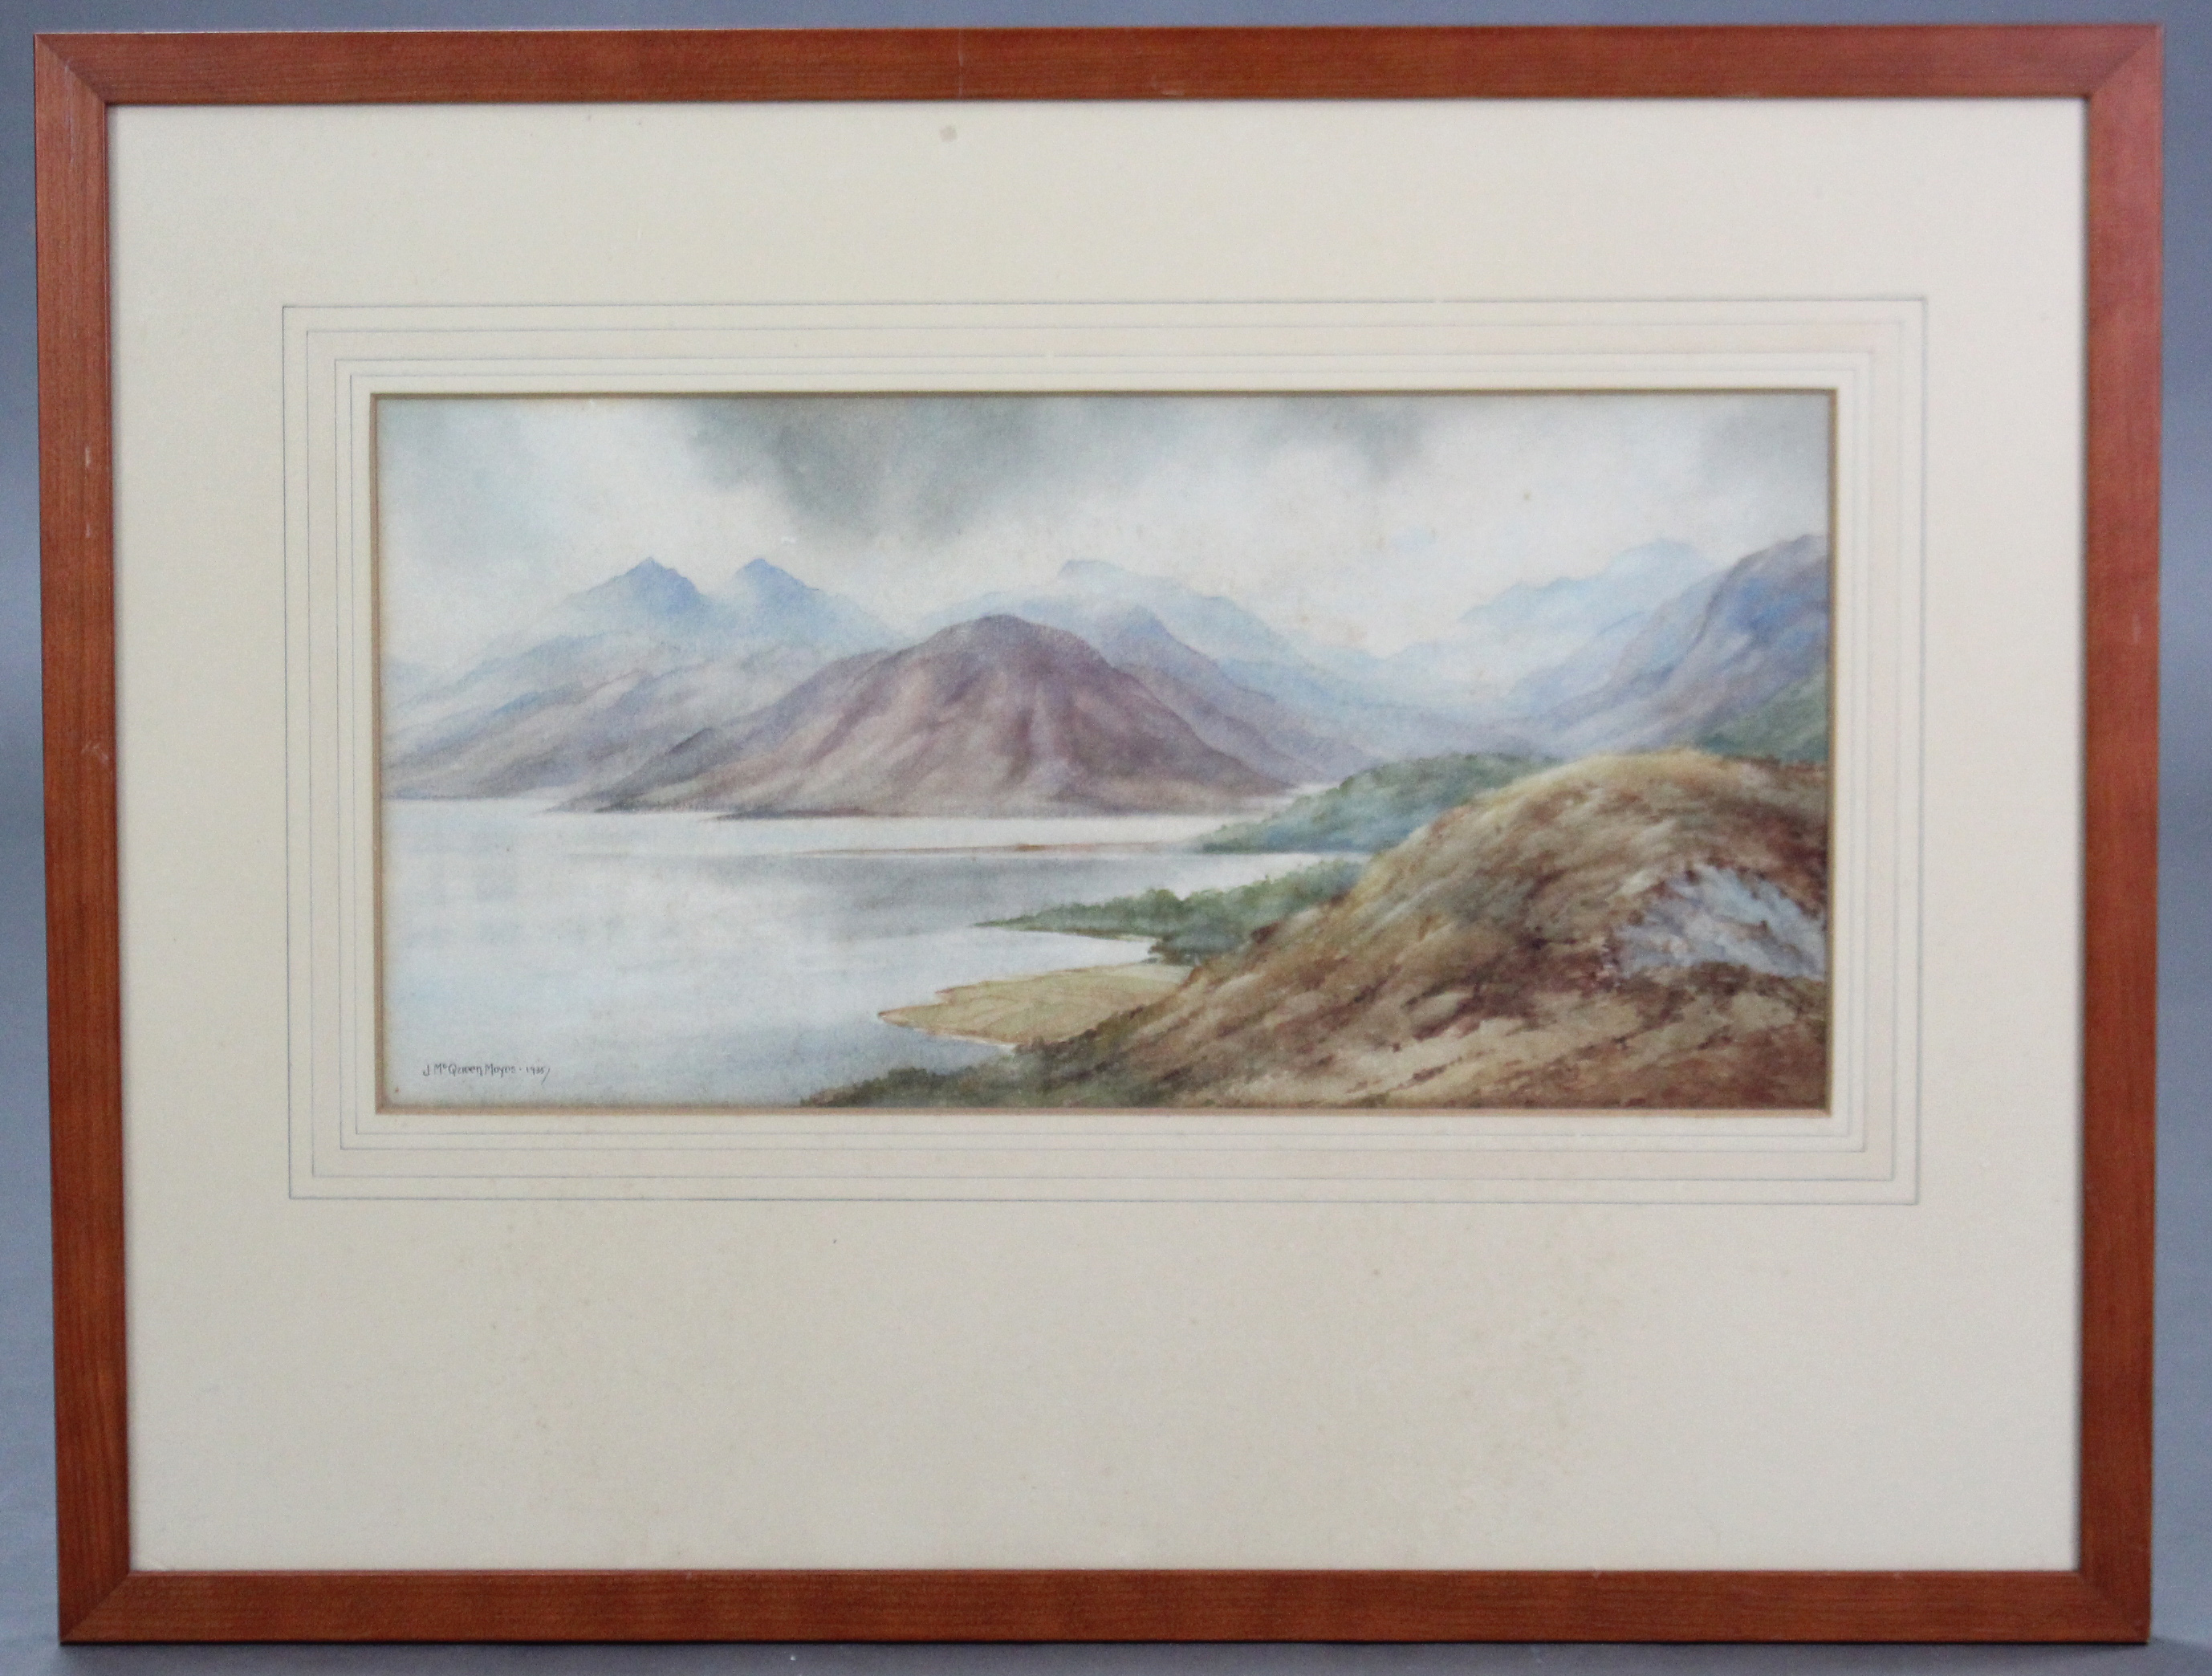 J. McQUEEN MOYES (early 20th century). A highland scene with lake to the fore, mountains beyond. - Image 2 of 3